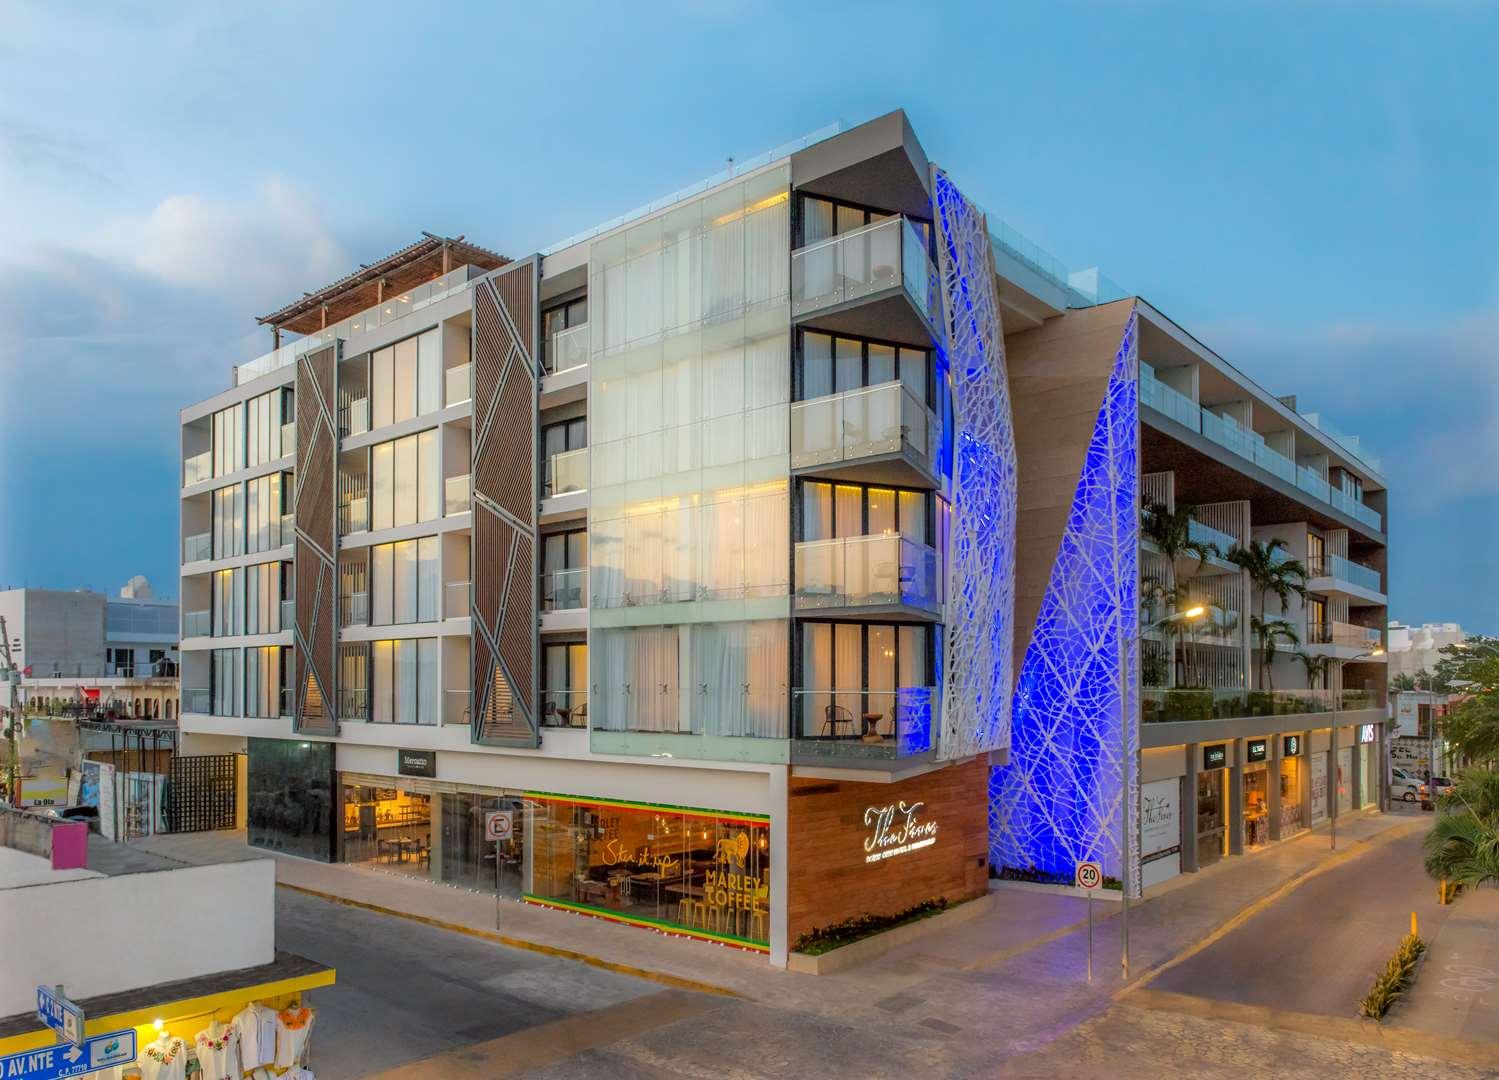 The Fives Downtown Hotel & Residences, Curio Collection by Hilton in Playa del Carmen, MX